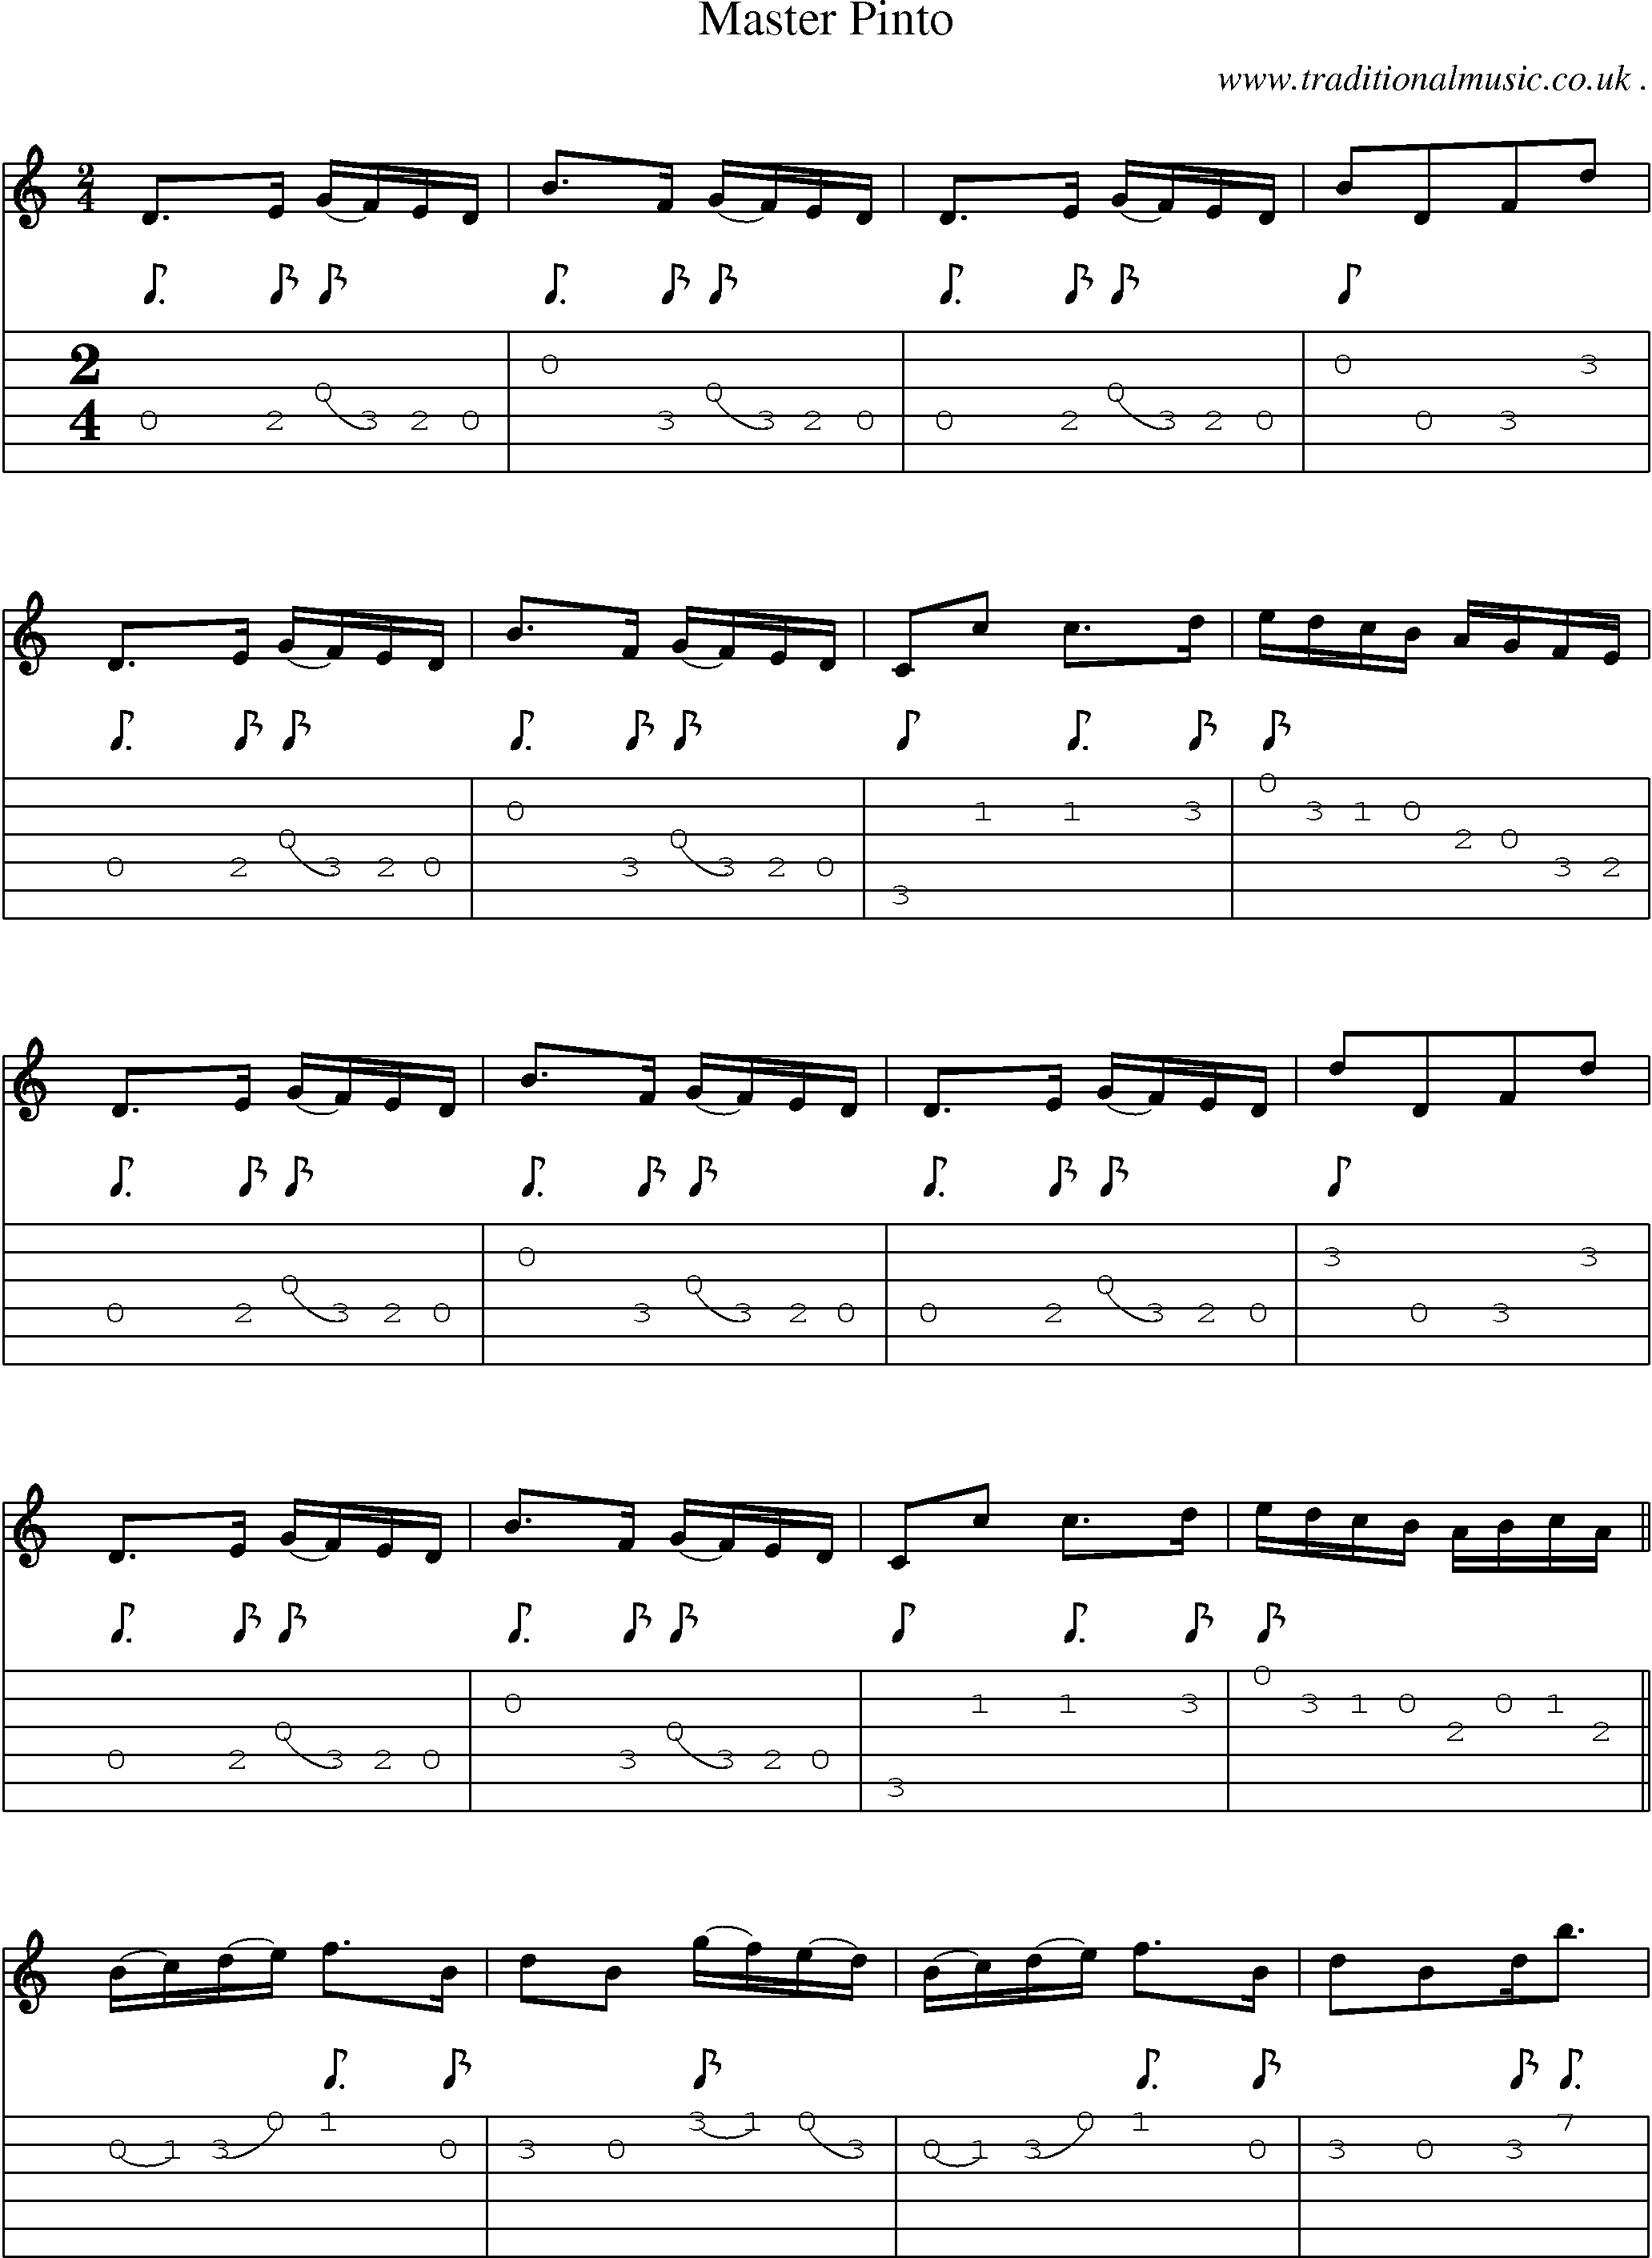 Sheet-music  score, Chords and Guitar Tabs for Master Pinto